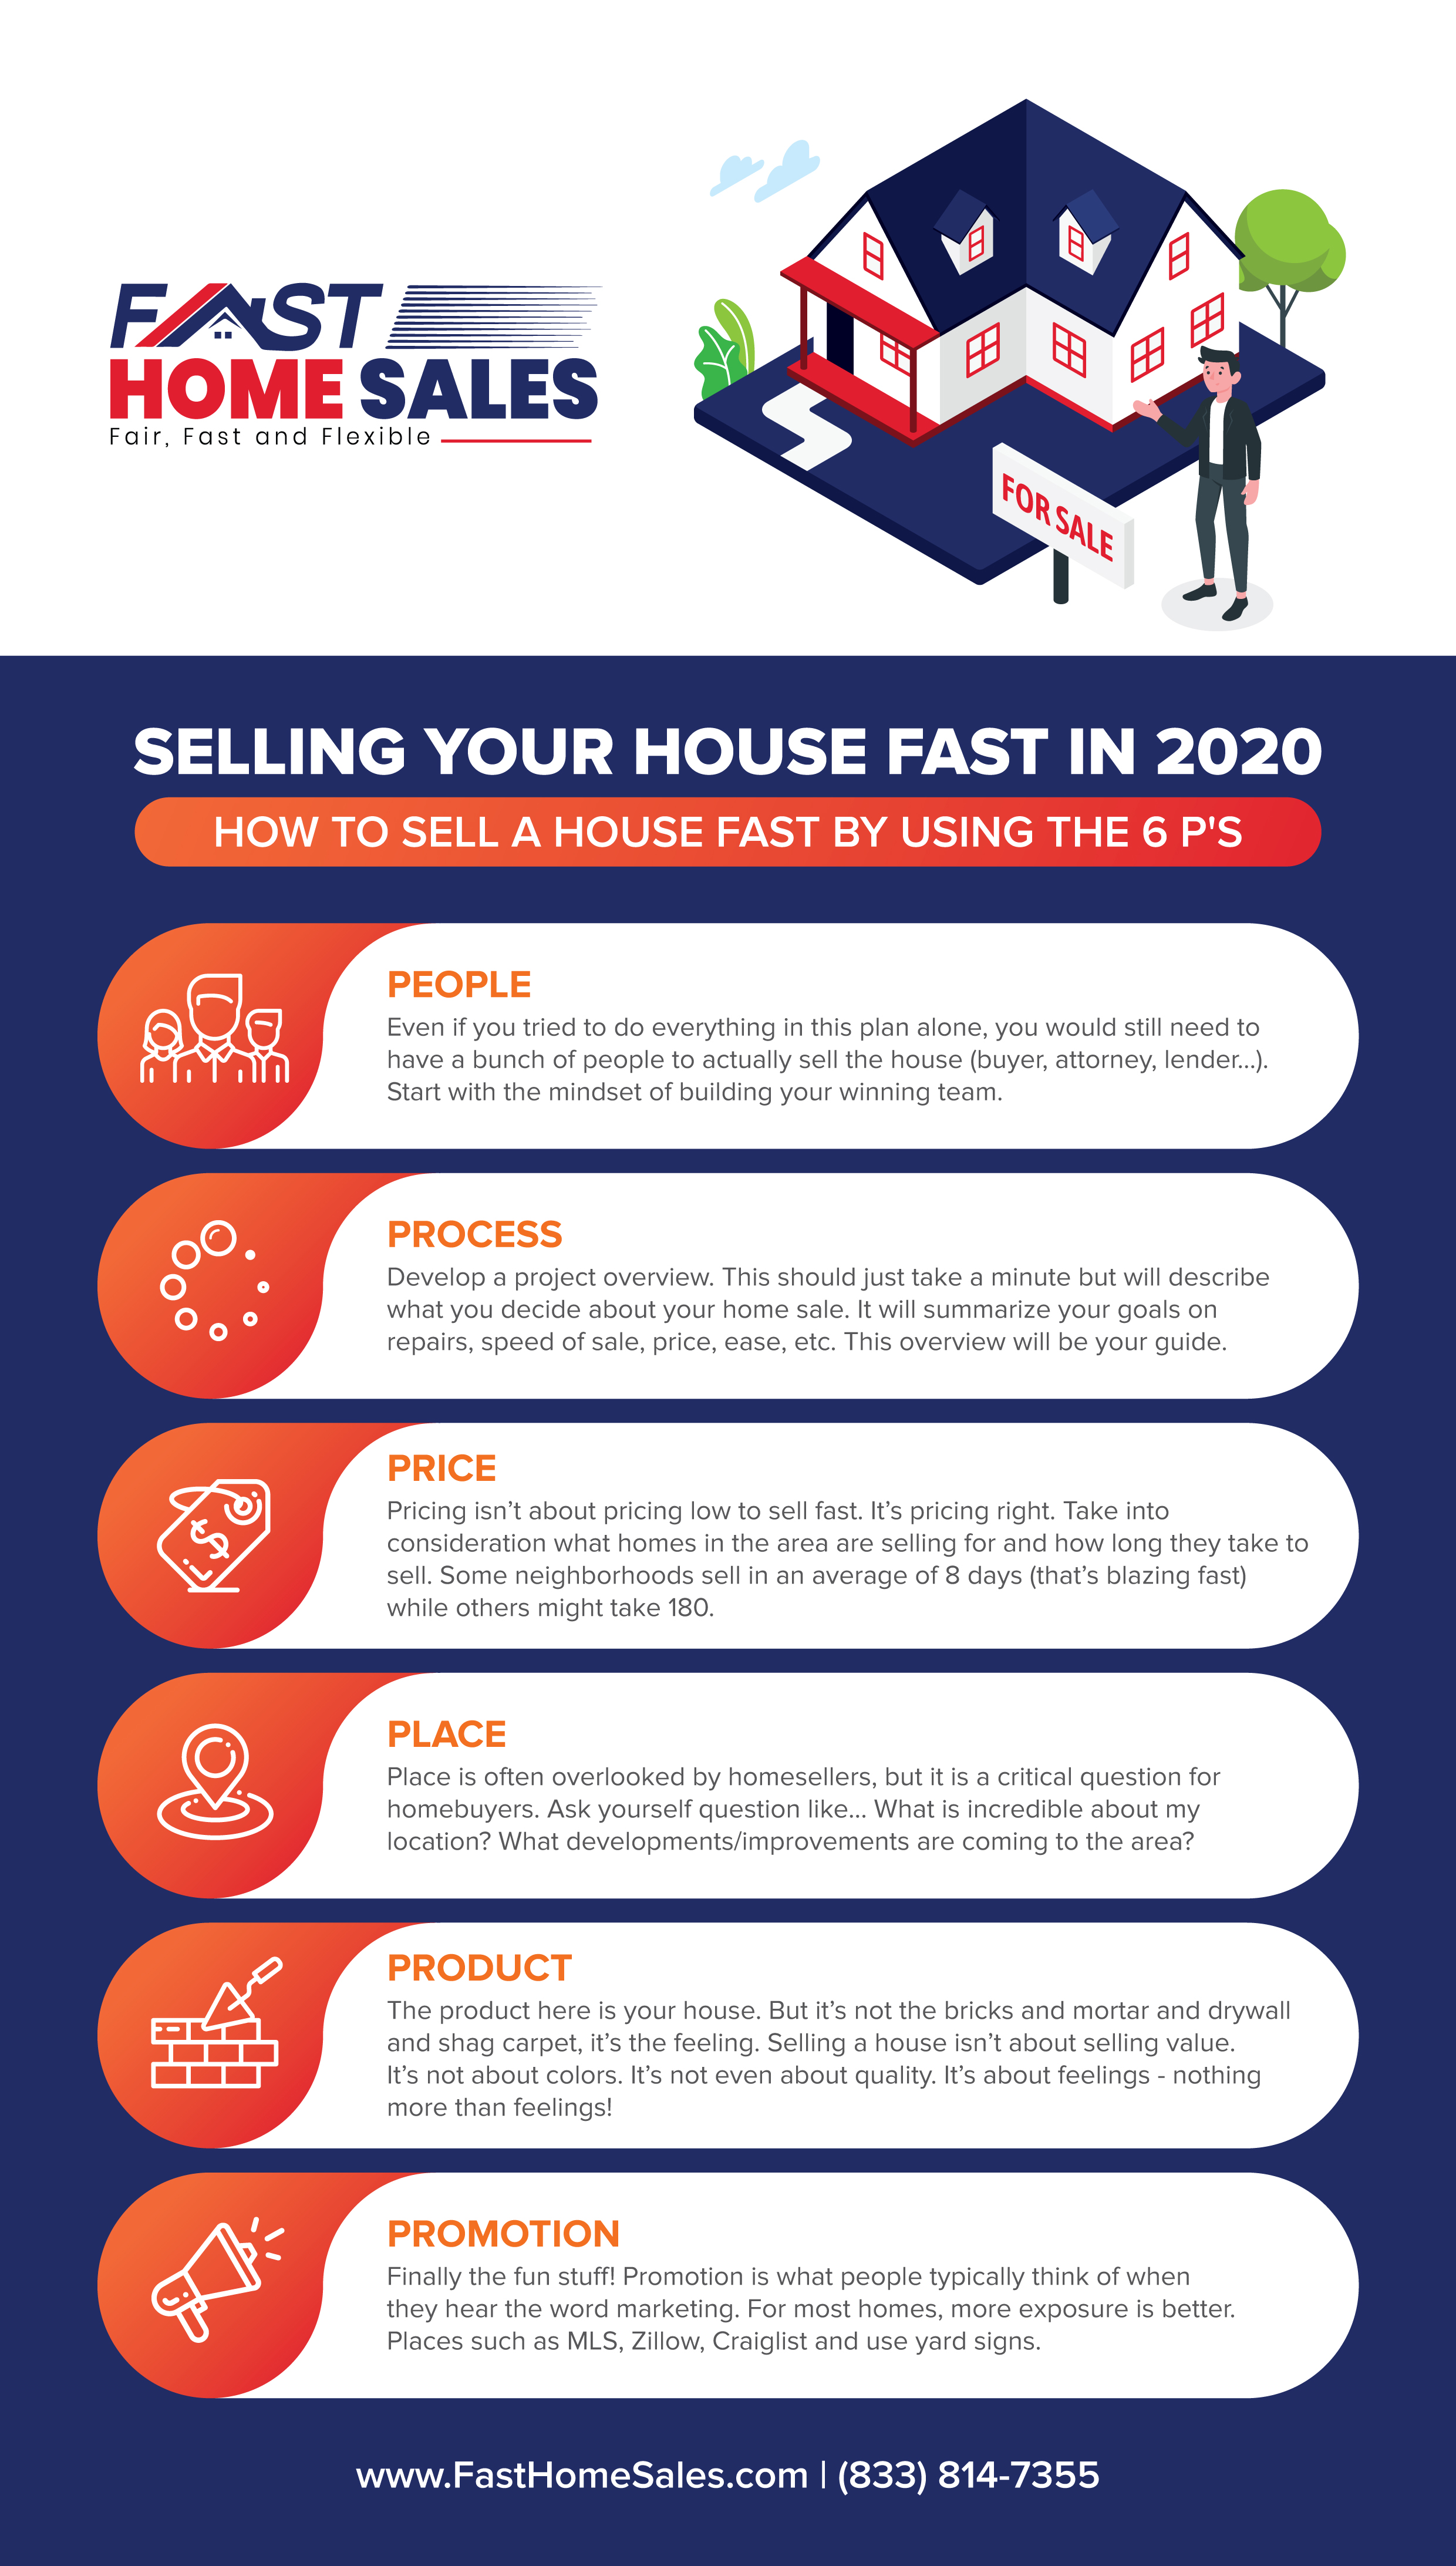 How To Sell Your House By Using The 6 P's